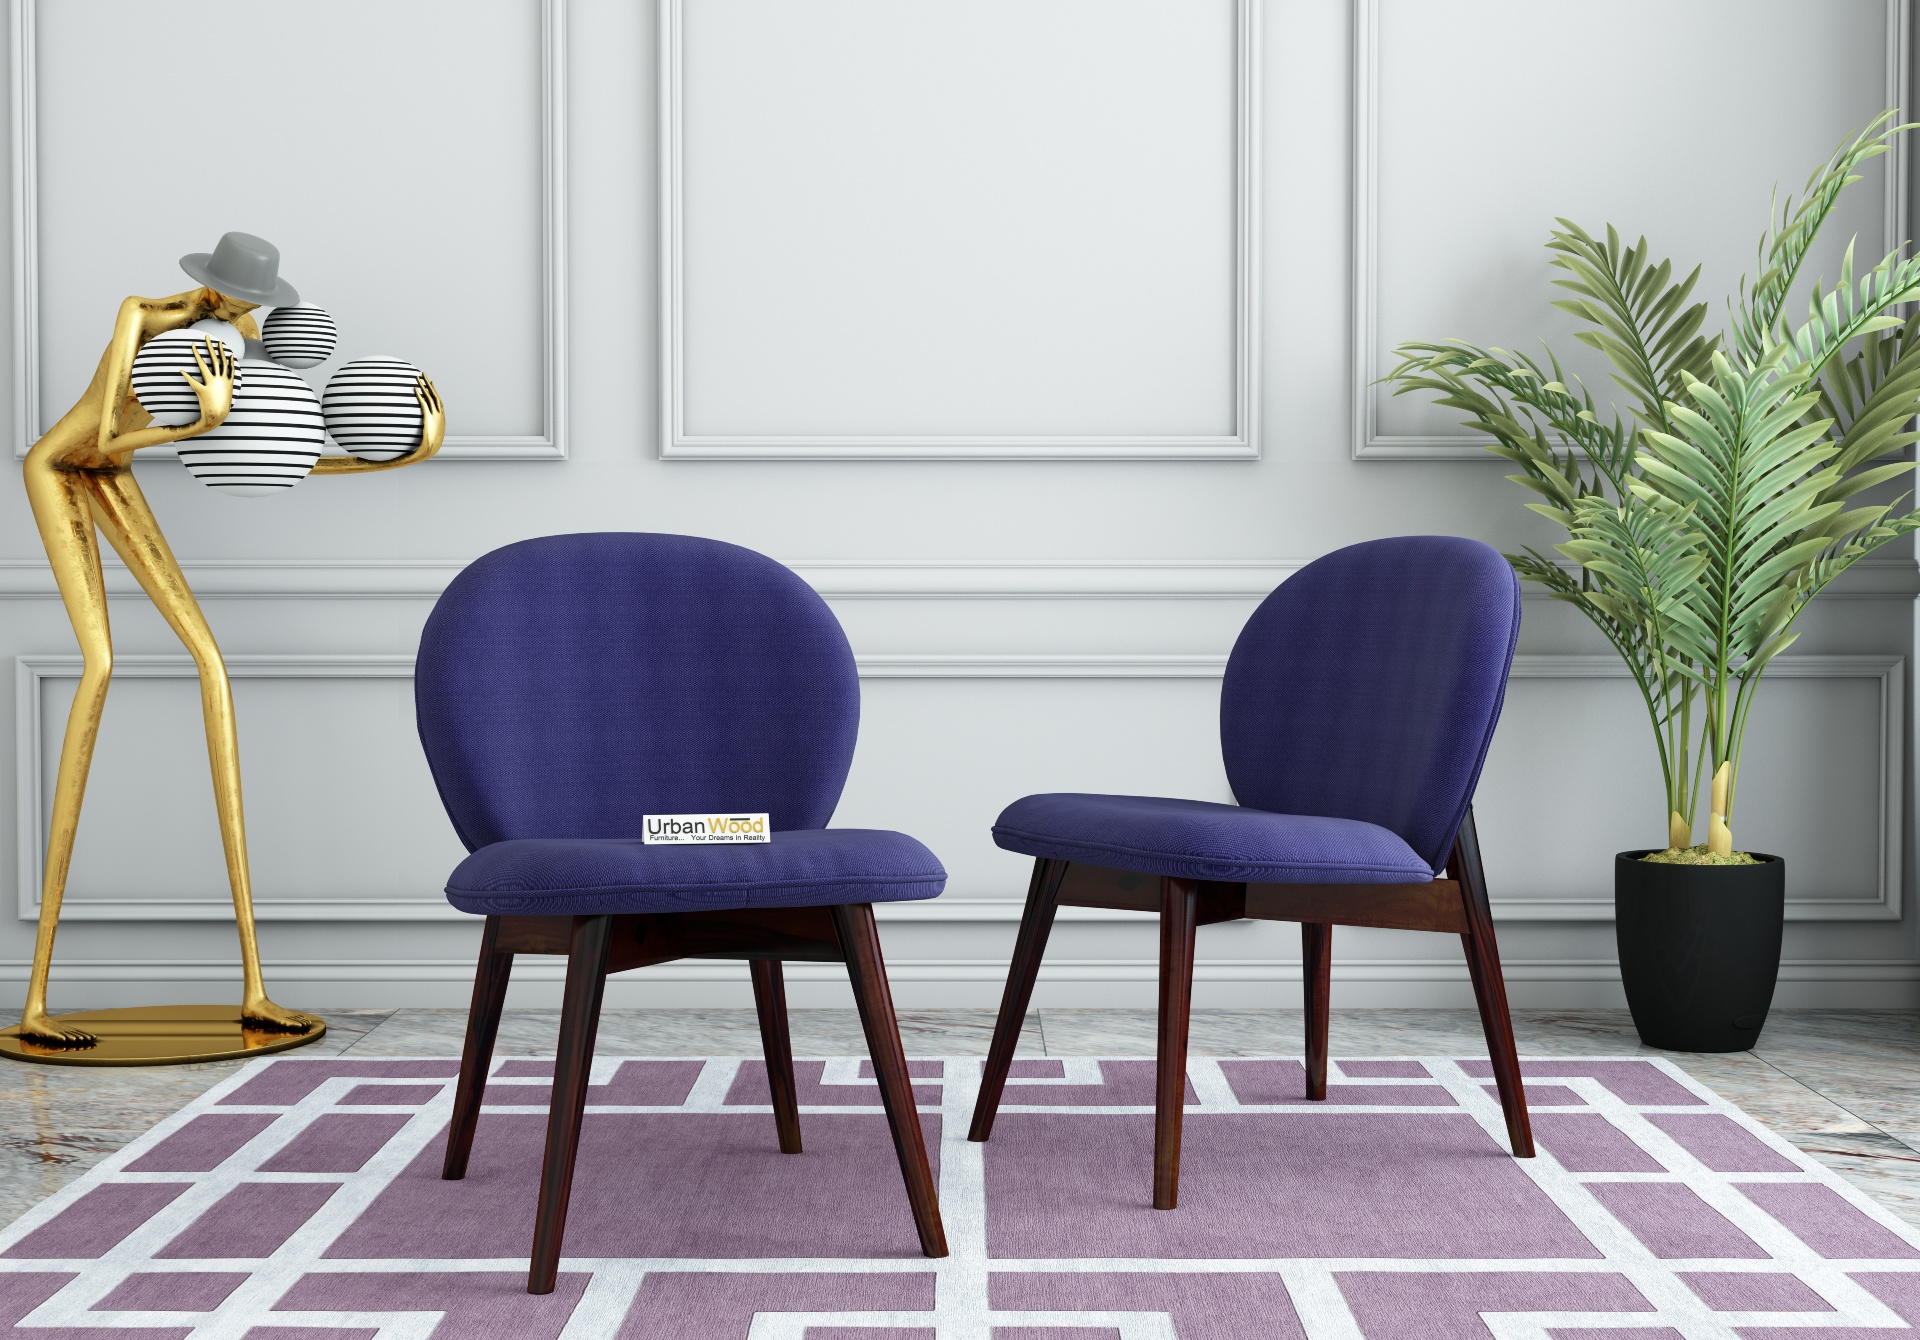 Serene Dining Chair - Set Of 2 (Cotton, Navy Blue)